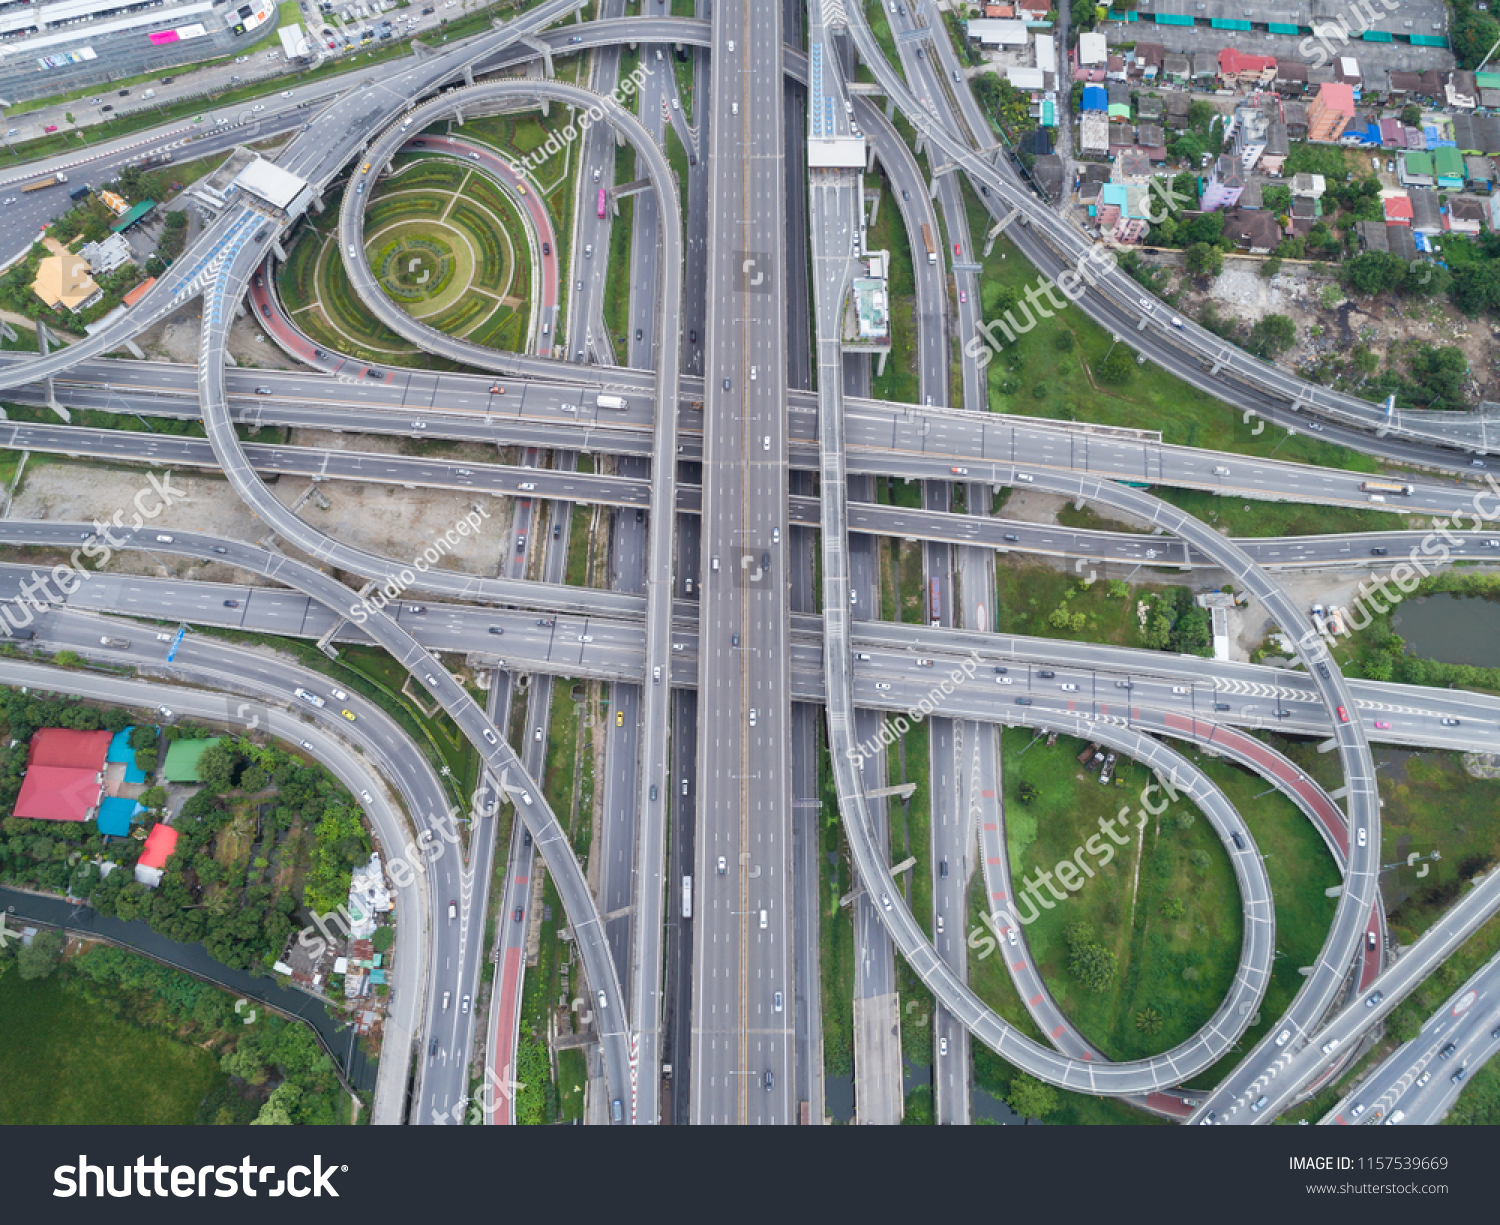 Aeriel view highway road intersection for transportation or traffic background. #1157539669